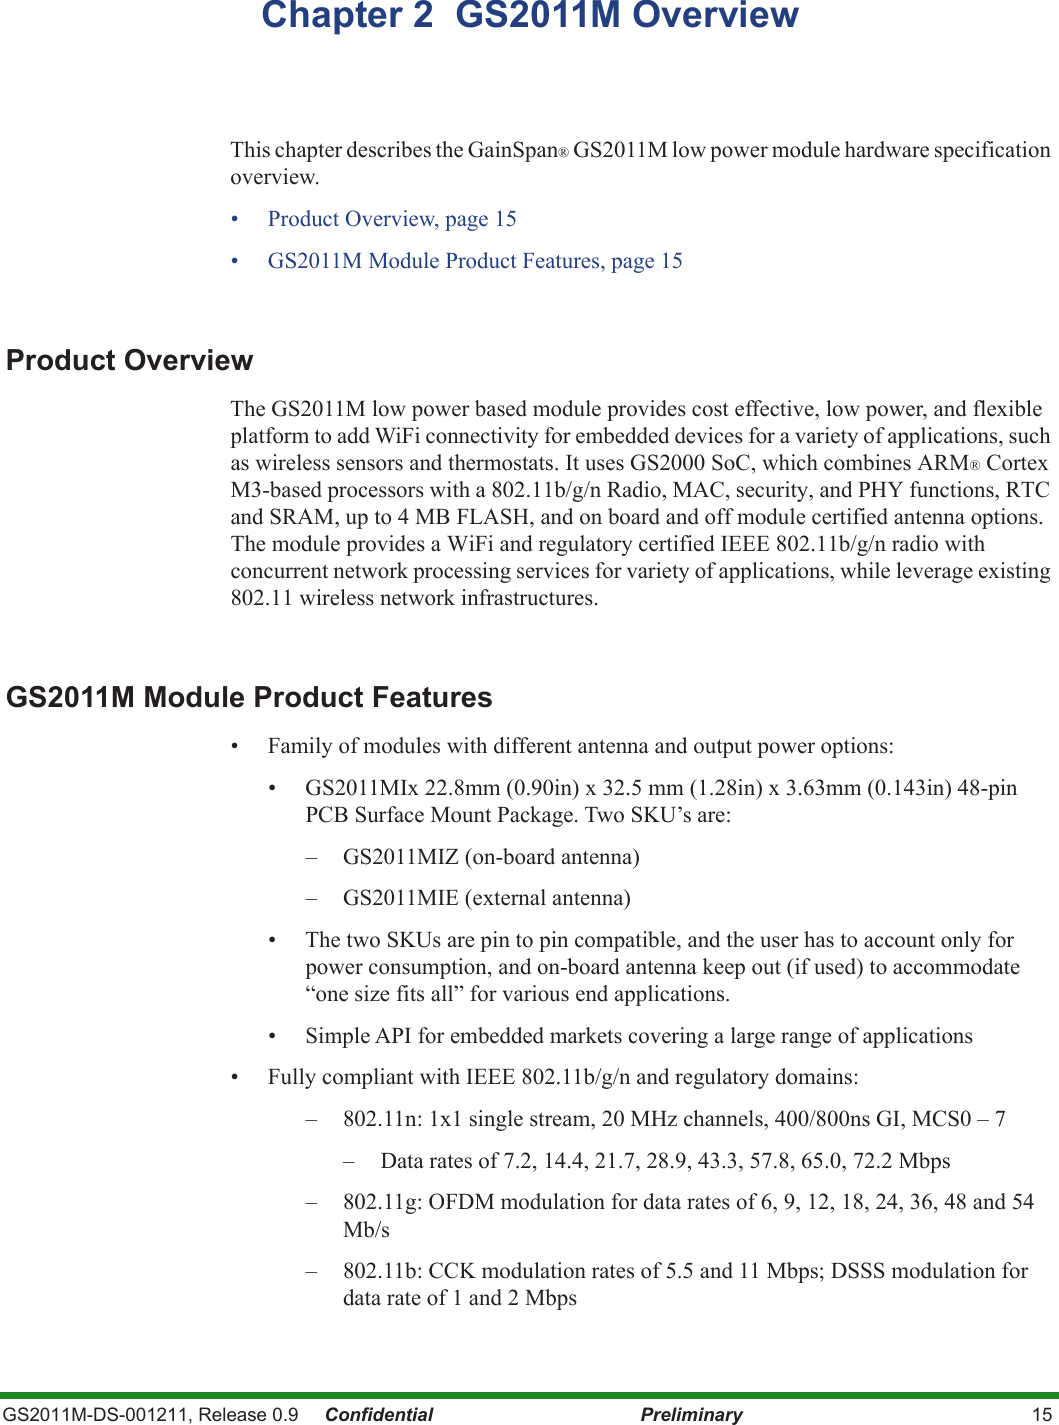 GS2011M-DS-001211, Release 0.9     Confidential Preliminary 15Chapter 2  GS2011M OverviewThis chapter describes the GainSpan® GS2011M low power module hardware specification overview. • Product Overview, page 15• GS2011M Module Product Features, page 15Product OverviewThe GS2011M low power based module provides cost effective, low power, and flexible platform to add WiFi connectivity for embedded devices for a variety of applications, such as wireless sensors and thermostats. It uses GS2000 SoC, which combines ARM® Cortex M3-based processors with a 802.11b/g/n Radio, MAC, security, and PHY functions, RTC and SRAM, up to 4 MB FLASH, and on board and off module certified antenna options. The module provides a WiFi and regulatory certified IEEE 802.11b/g/n radio with concurrent network processing services for variety of applications, while leverage existing 802.11 wireless network infrastructures.GS2011M Module Product Features• Family of modules with different antenna and output power options:• GS2011MIx 22.8mm (0.90in) x 32.5 mm (1.28in) x 3.63mm (0.143in) 48-pin PCB Surface Mount Package. Two SKU’s are:– GS2011MIZ (on-board antenna)– GS2011MIE (external antenna)• The two SKUs are pin to pin compatible, and the user has to account only for power consumption, and on-board antenna keep out (if used) to accommodate “one size fits all” for various end applications.• Simple API for embedded markets covering a large range of applications• Fully compliant with IEEE 802.11b/g/n and regulatory domains:– 802.11n: 1x1 single stream, 20 MHz channels, 400/800ns GI, MCS0 – 7– Data rates of 7.2, 14.4, 21.7, 28.9, 43.3, 57.8, 65.0, 72.2 Mbps– 802.11g: OFDM modulation for data rates of 6, 9, 12, 18, 24, 36, 48 and 54 Mb/s– 802.11b: CCK modulation rates of 5.5 and 11 Mbps; DSSS modulation for data rate of 1 and 2 Mbps